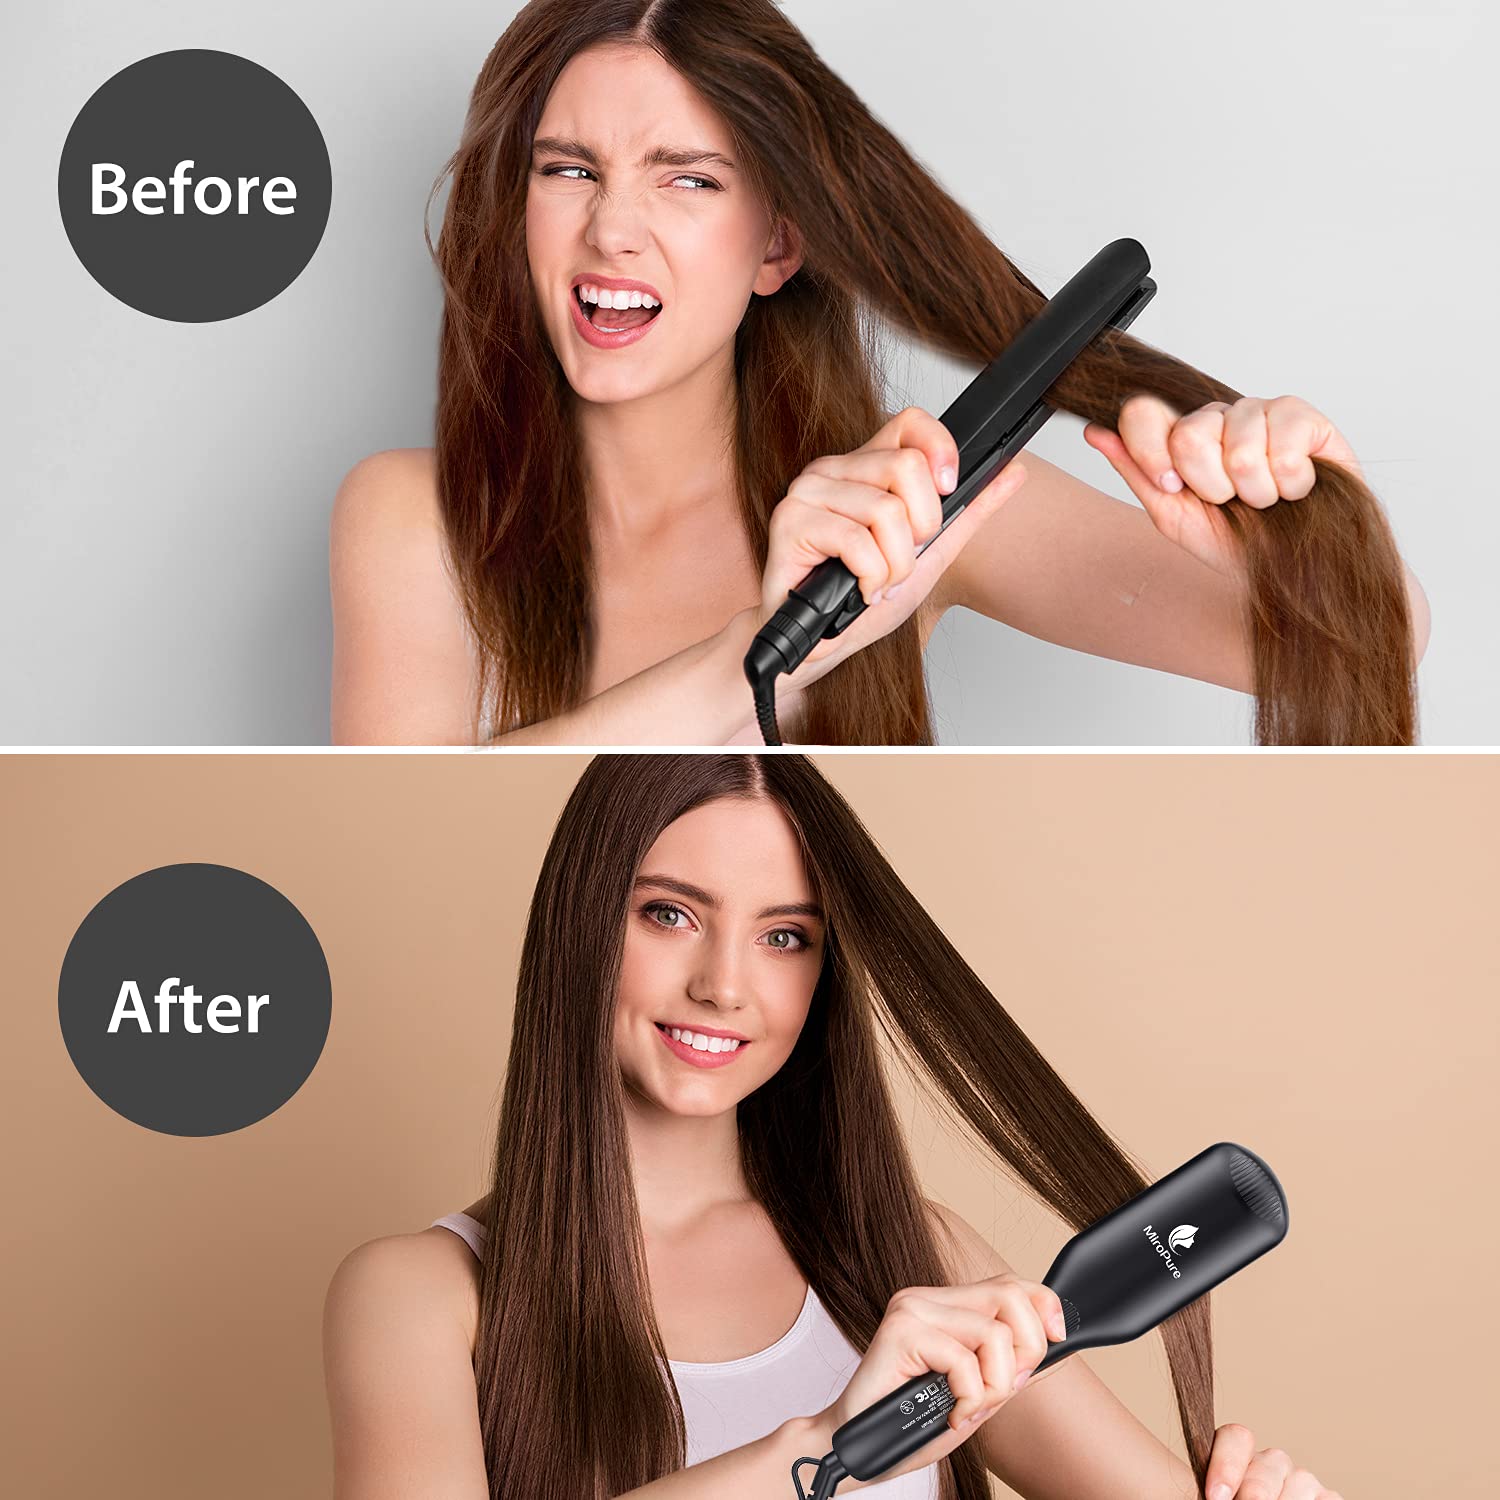 Heated Brush Gets Rave Reviews For Taming Frizzy Hair - Simplemost